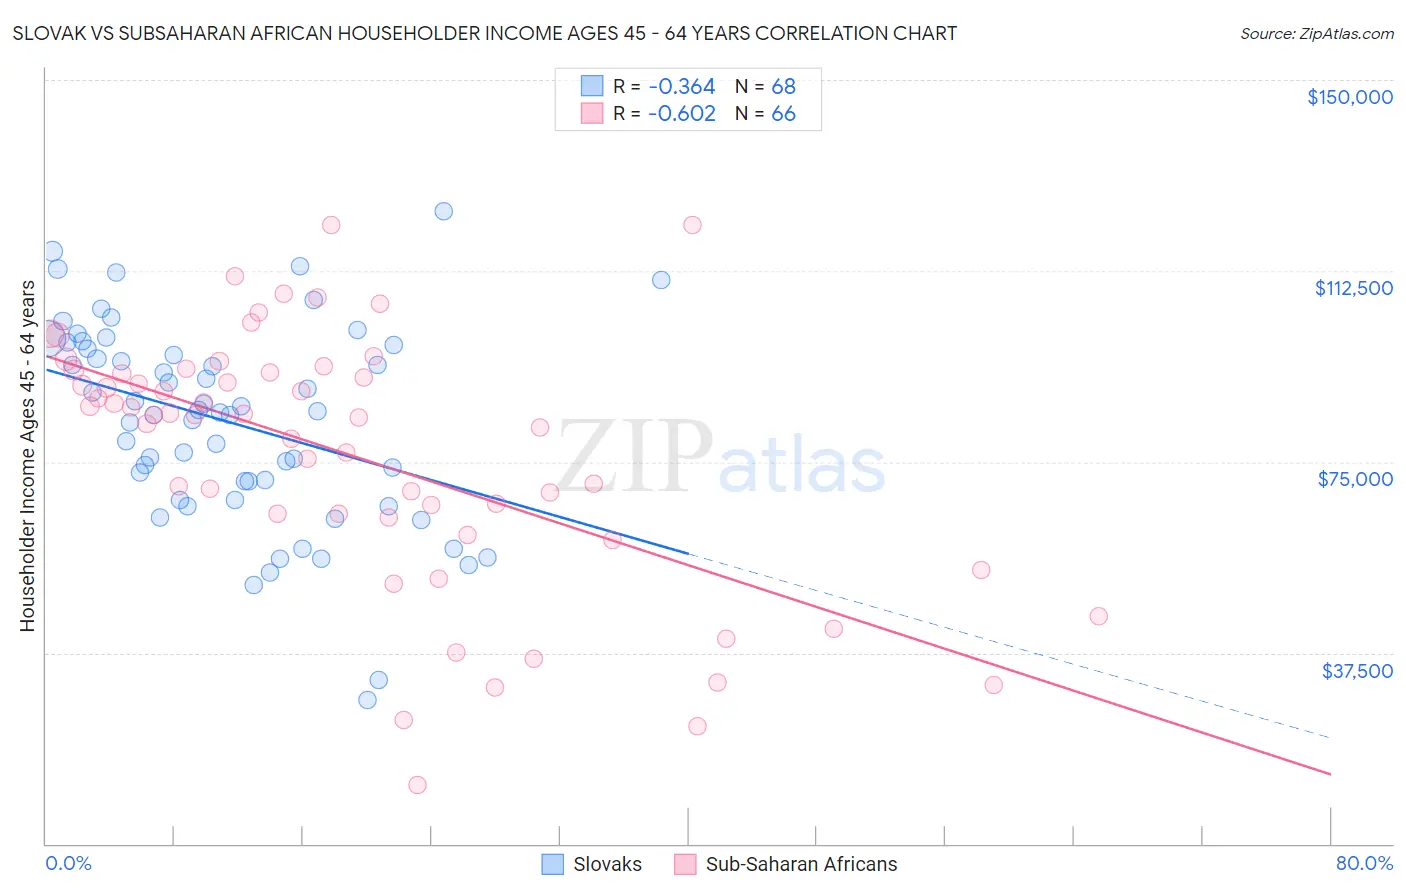 Slovak vs Subsaharan African Householder Income Ages 45 - 64 years